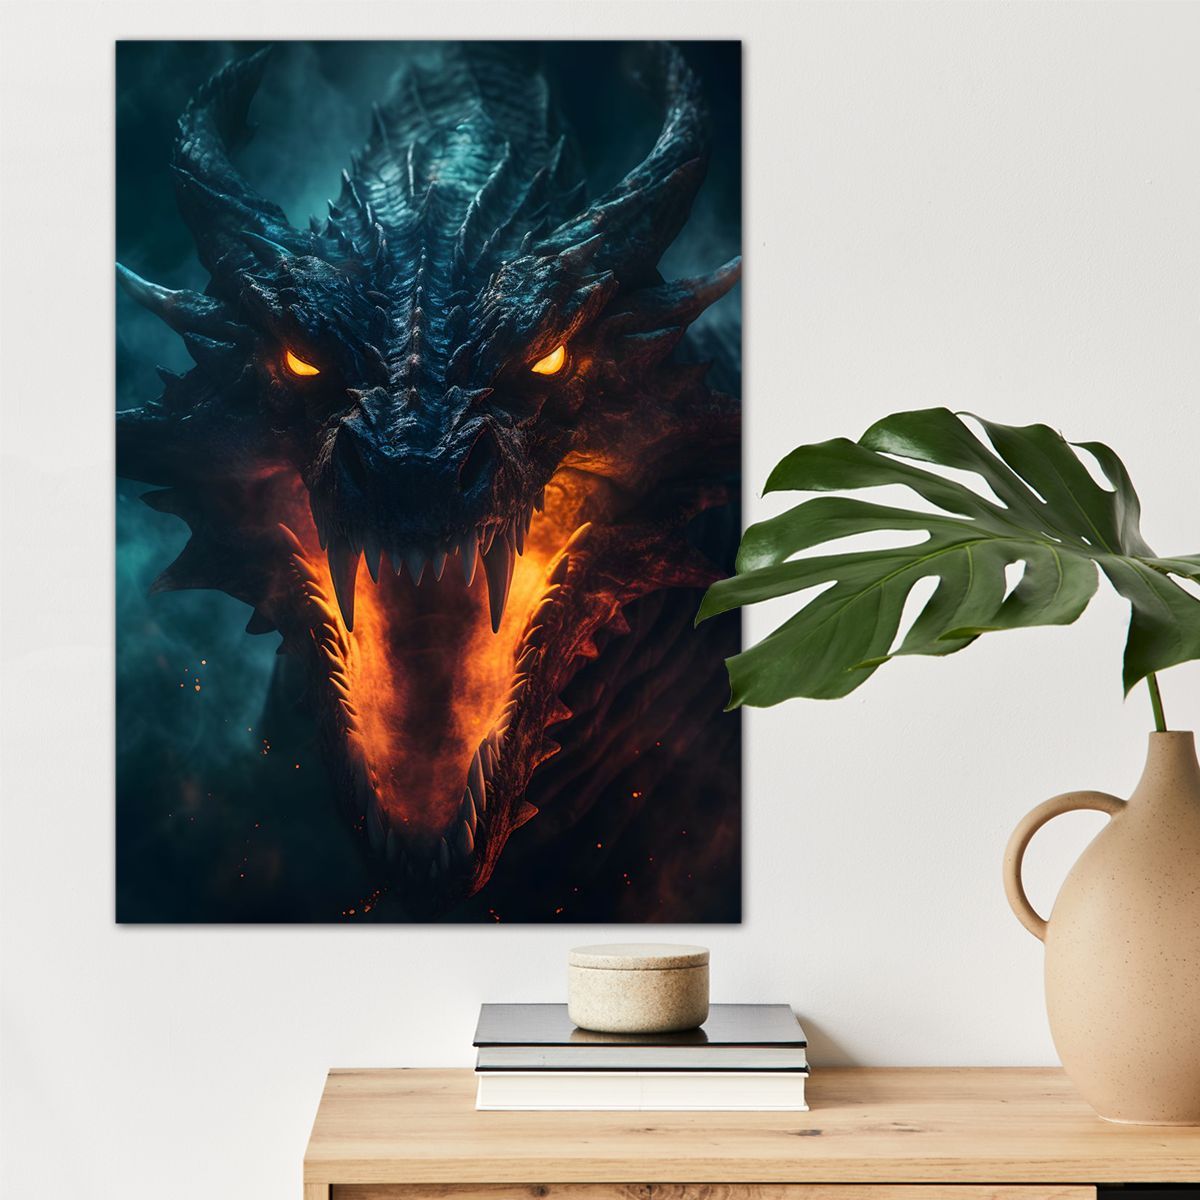 

1pc Fiery Dragon Breath Poster Canvas Wall Art For Home Decor, Animal Lovers Poster Wall Decor High Quality Canvas Prints For Living Room Bedroom Kitchen Office Cafe Decor, Perfect Gift And Decoration